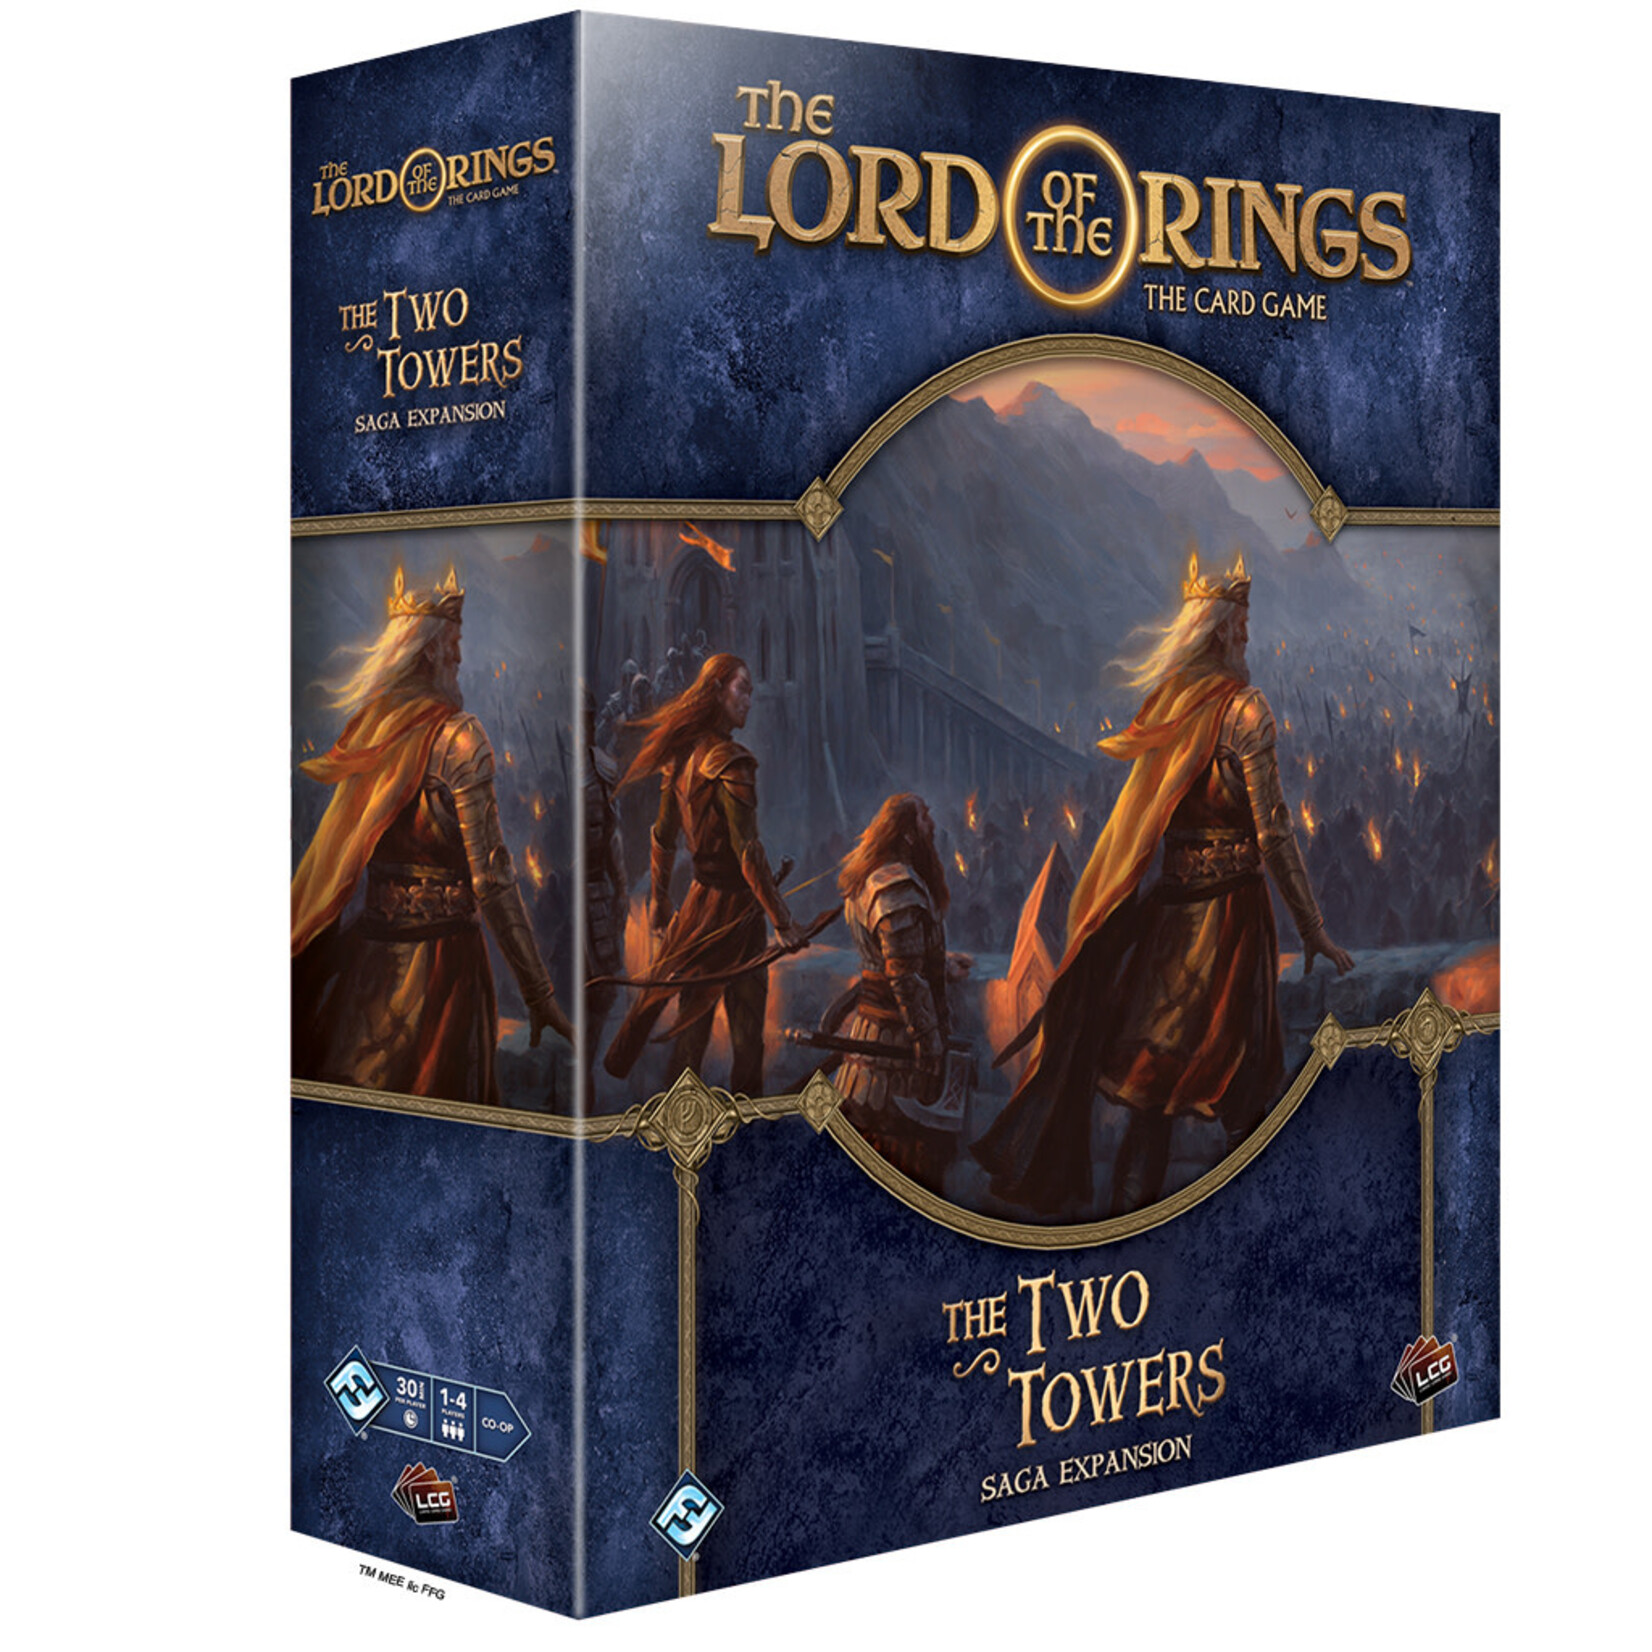 Fantasy Flight Games The Lord of the Rings LCG: The Two Towers (Saga Expansion)